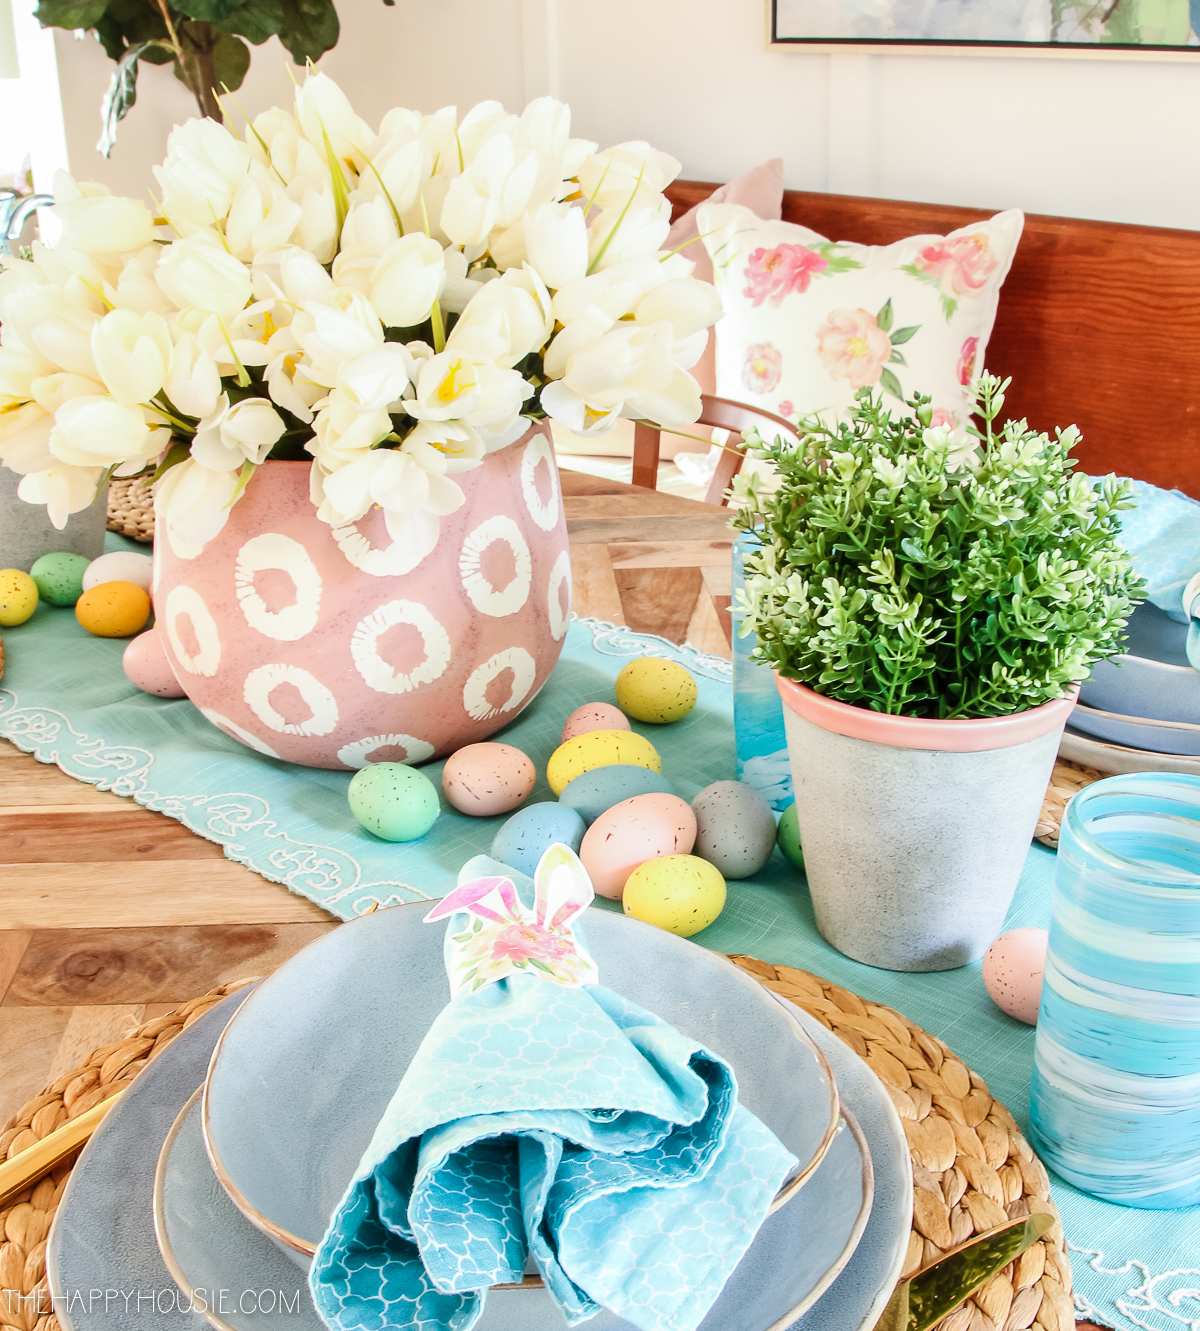 There are scattered Easter eggs in pink, blue and yellow on the table.